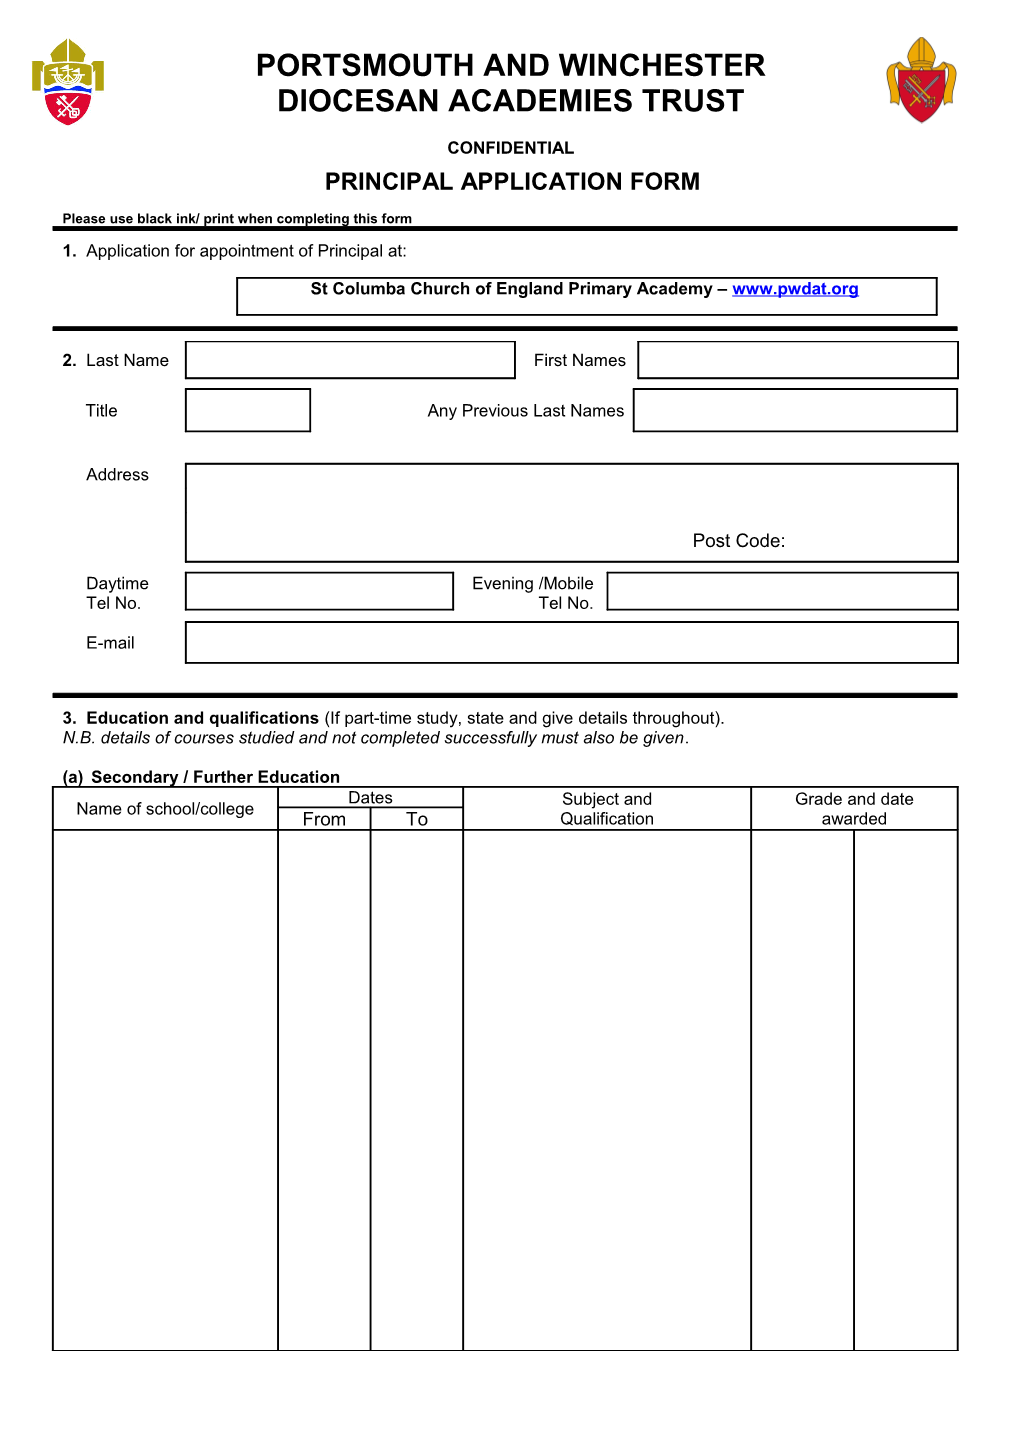 Please Use Black Ink/ Print When Completing This Form